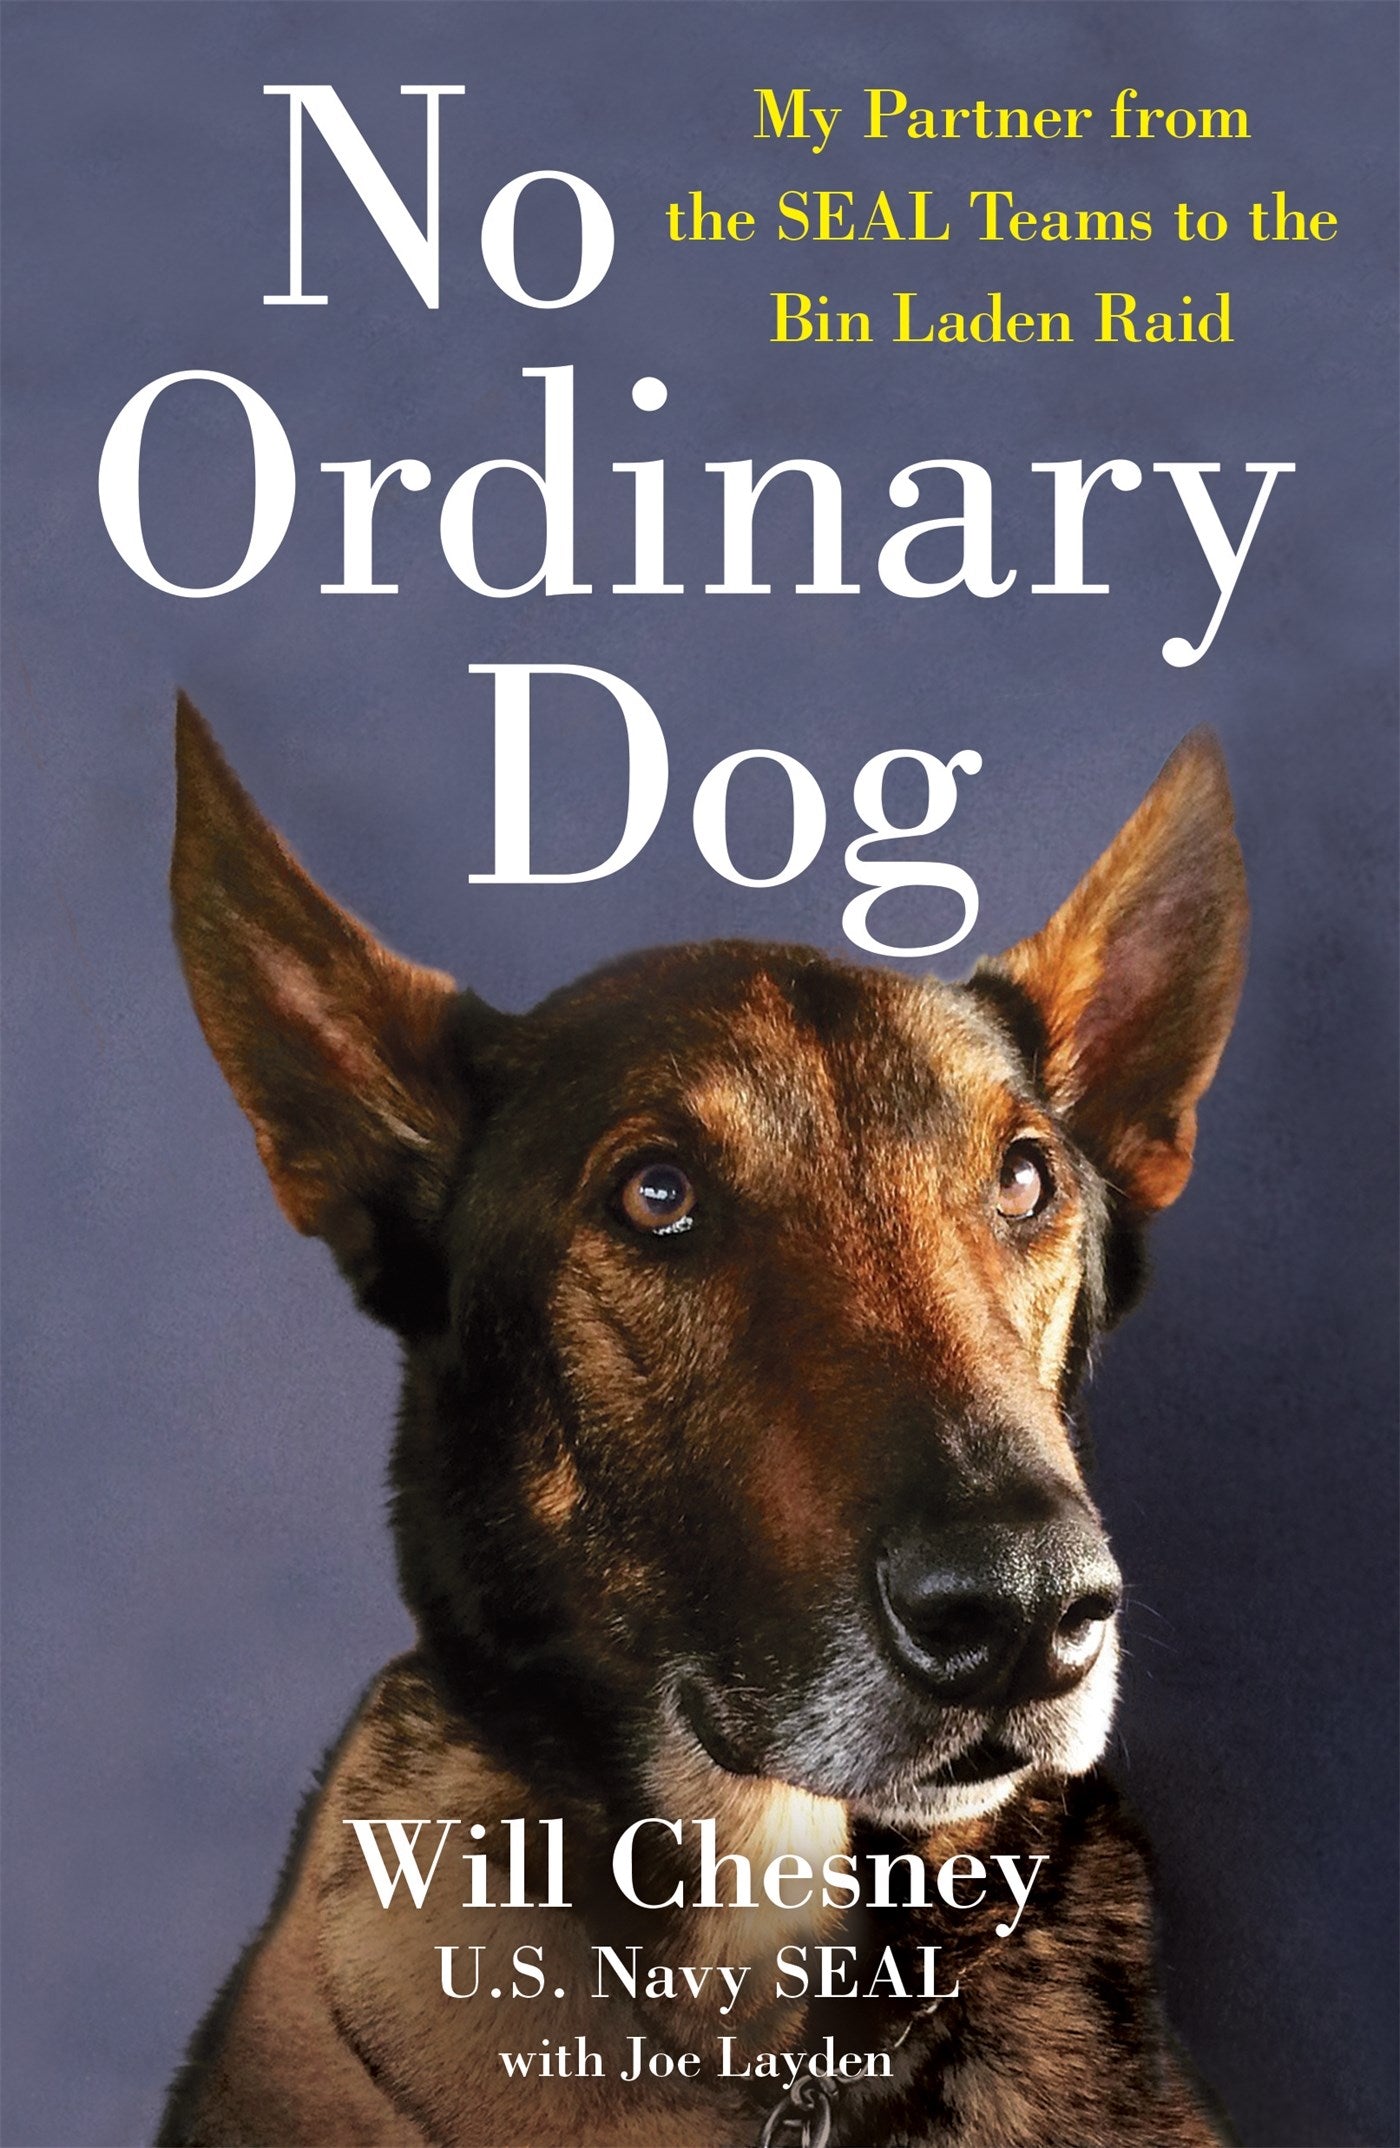 No Ordinary Dog: My Partner from the SEAL Teams to the Bin Laden Raid